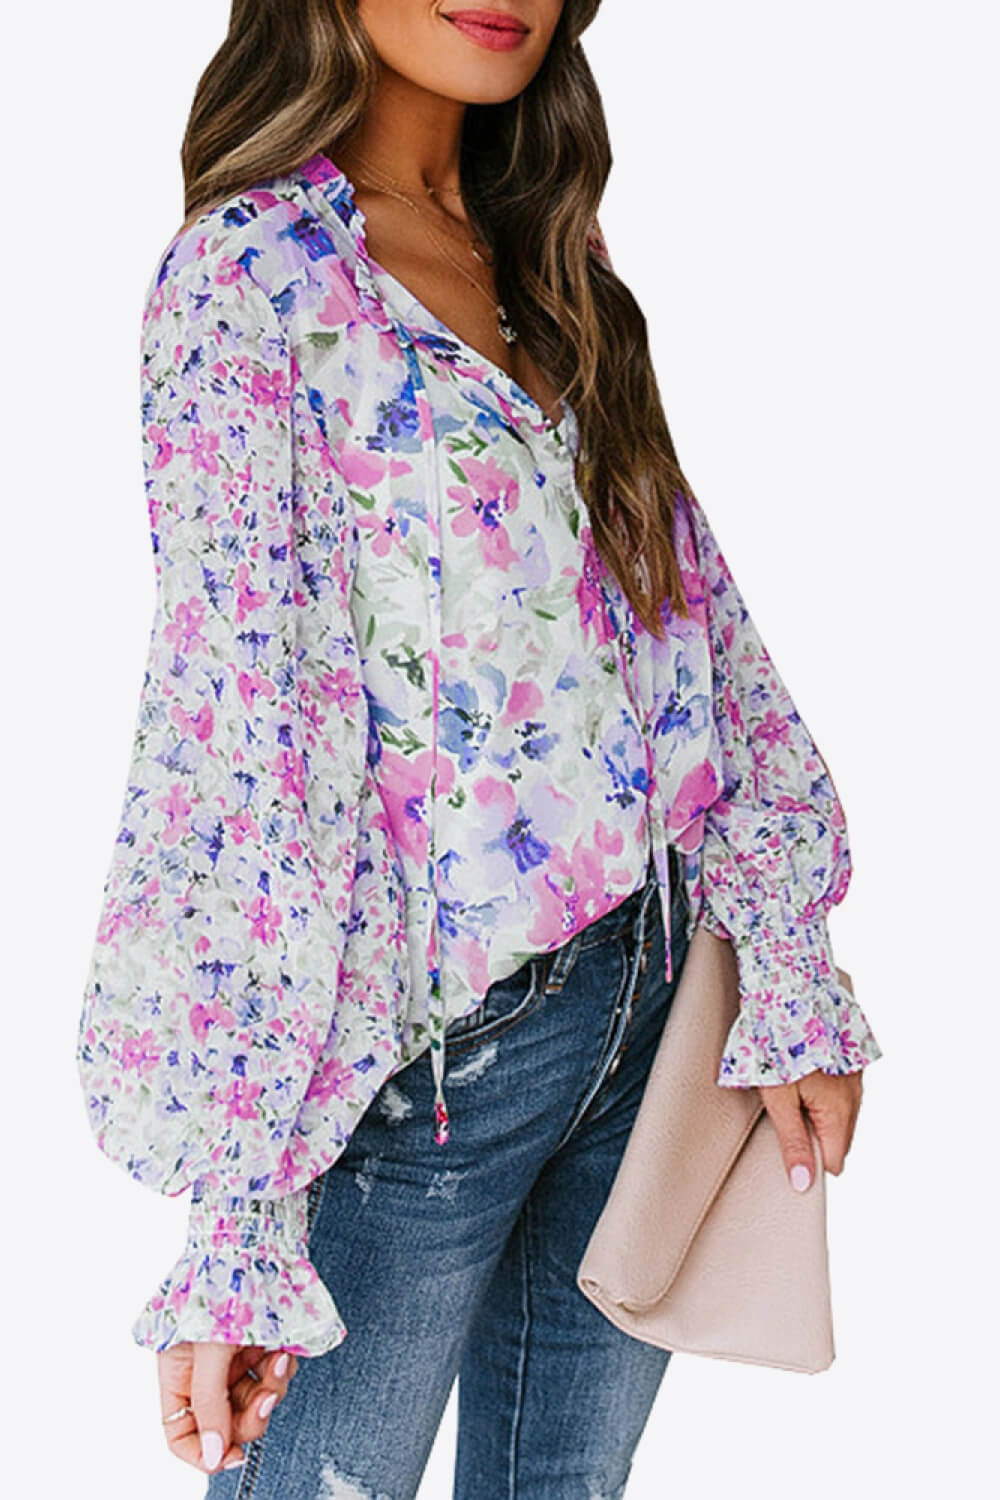 Cara Floral Buttoned Lantern Sleeve Blouse- 1 size Small/Blush Pink left! FINAL SALE!